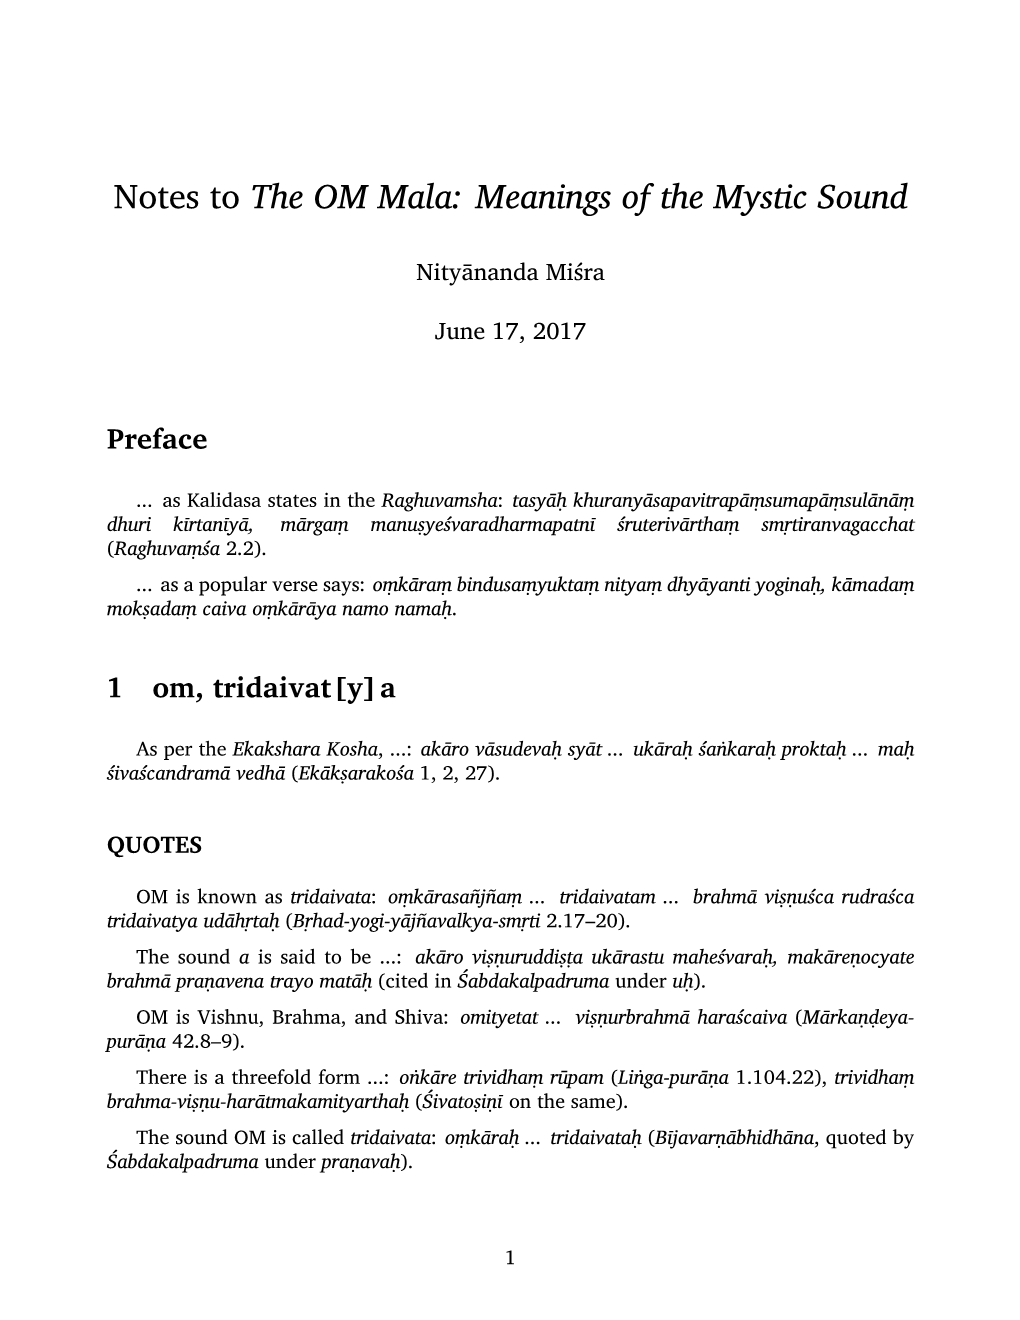 Notes to the OM Mala: Meanings of the Mystic Sound